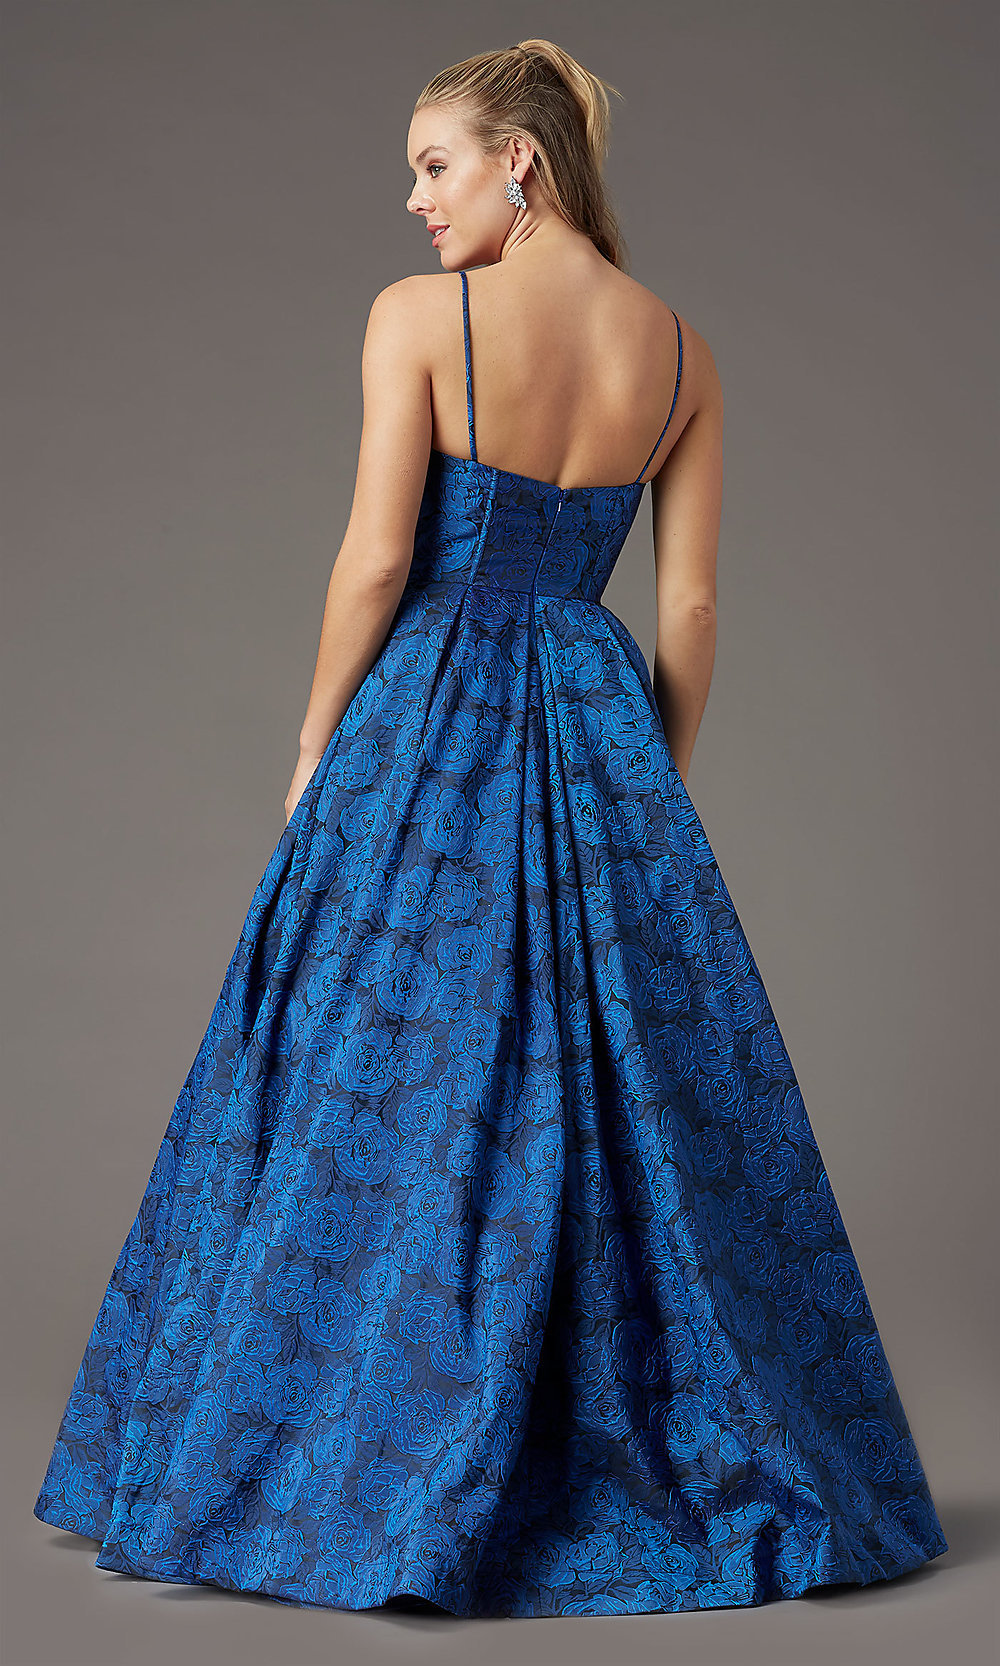 Long Floral-Print Brocade Prom Dress by PromGirl